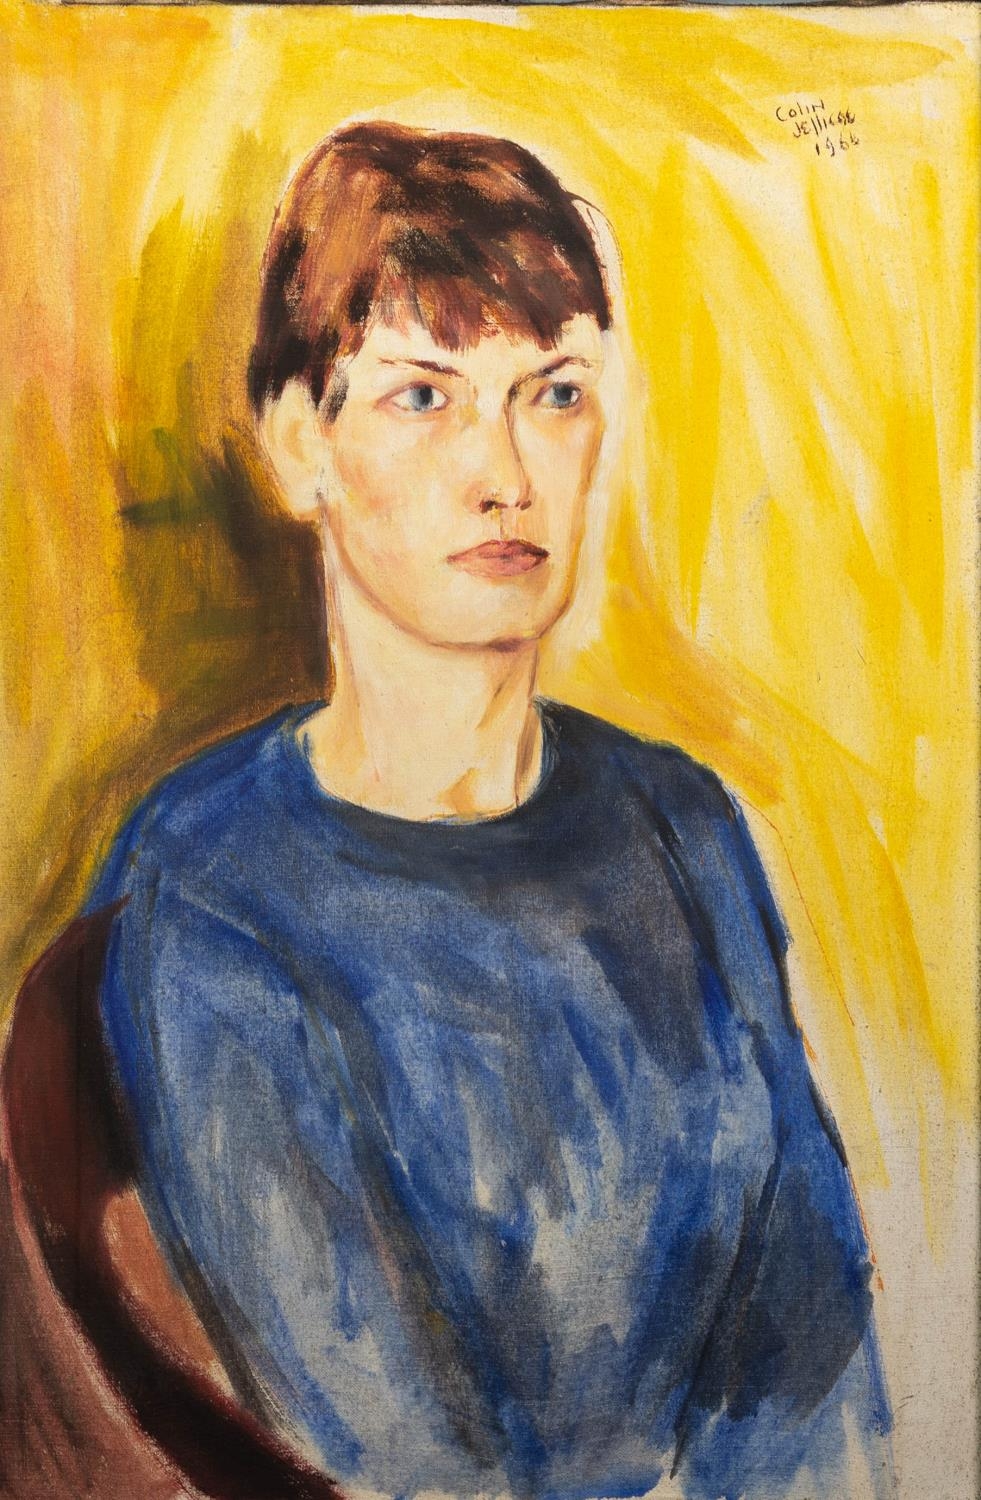 COLIN JELLICOE (1942-2018) OIL ON CANVAS Half-length female portrait Signed and dated 1966 23 ½? x